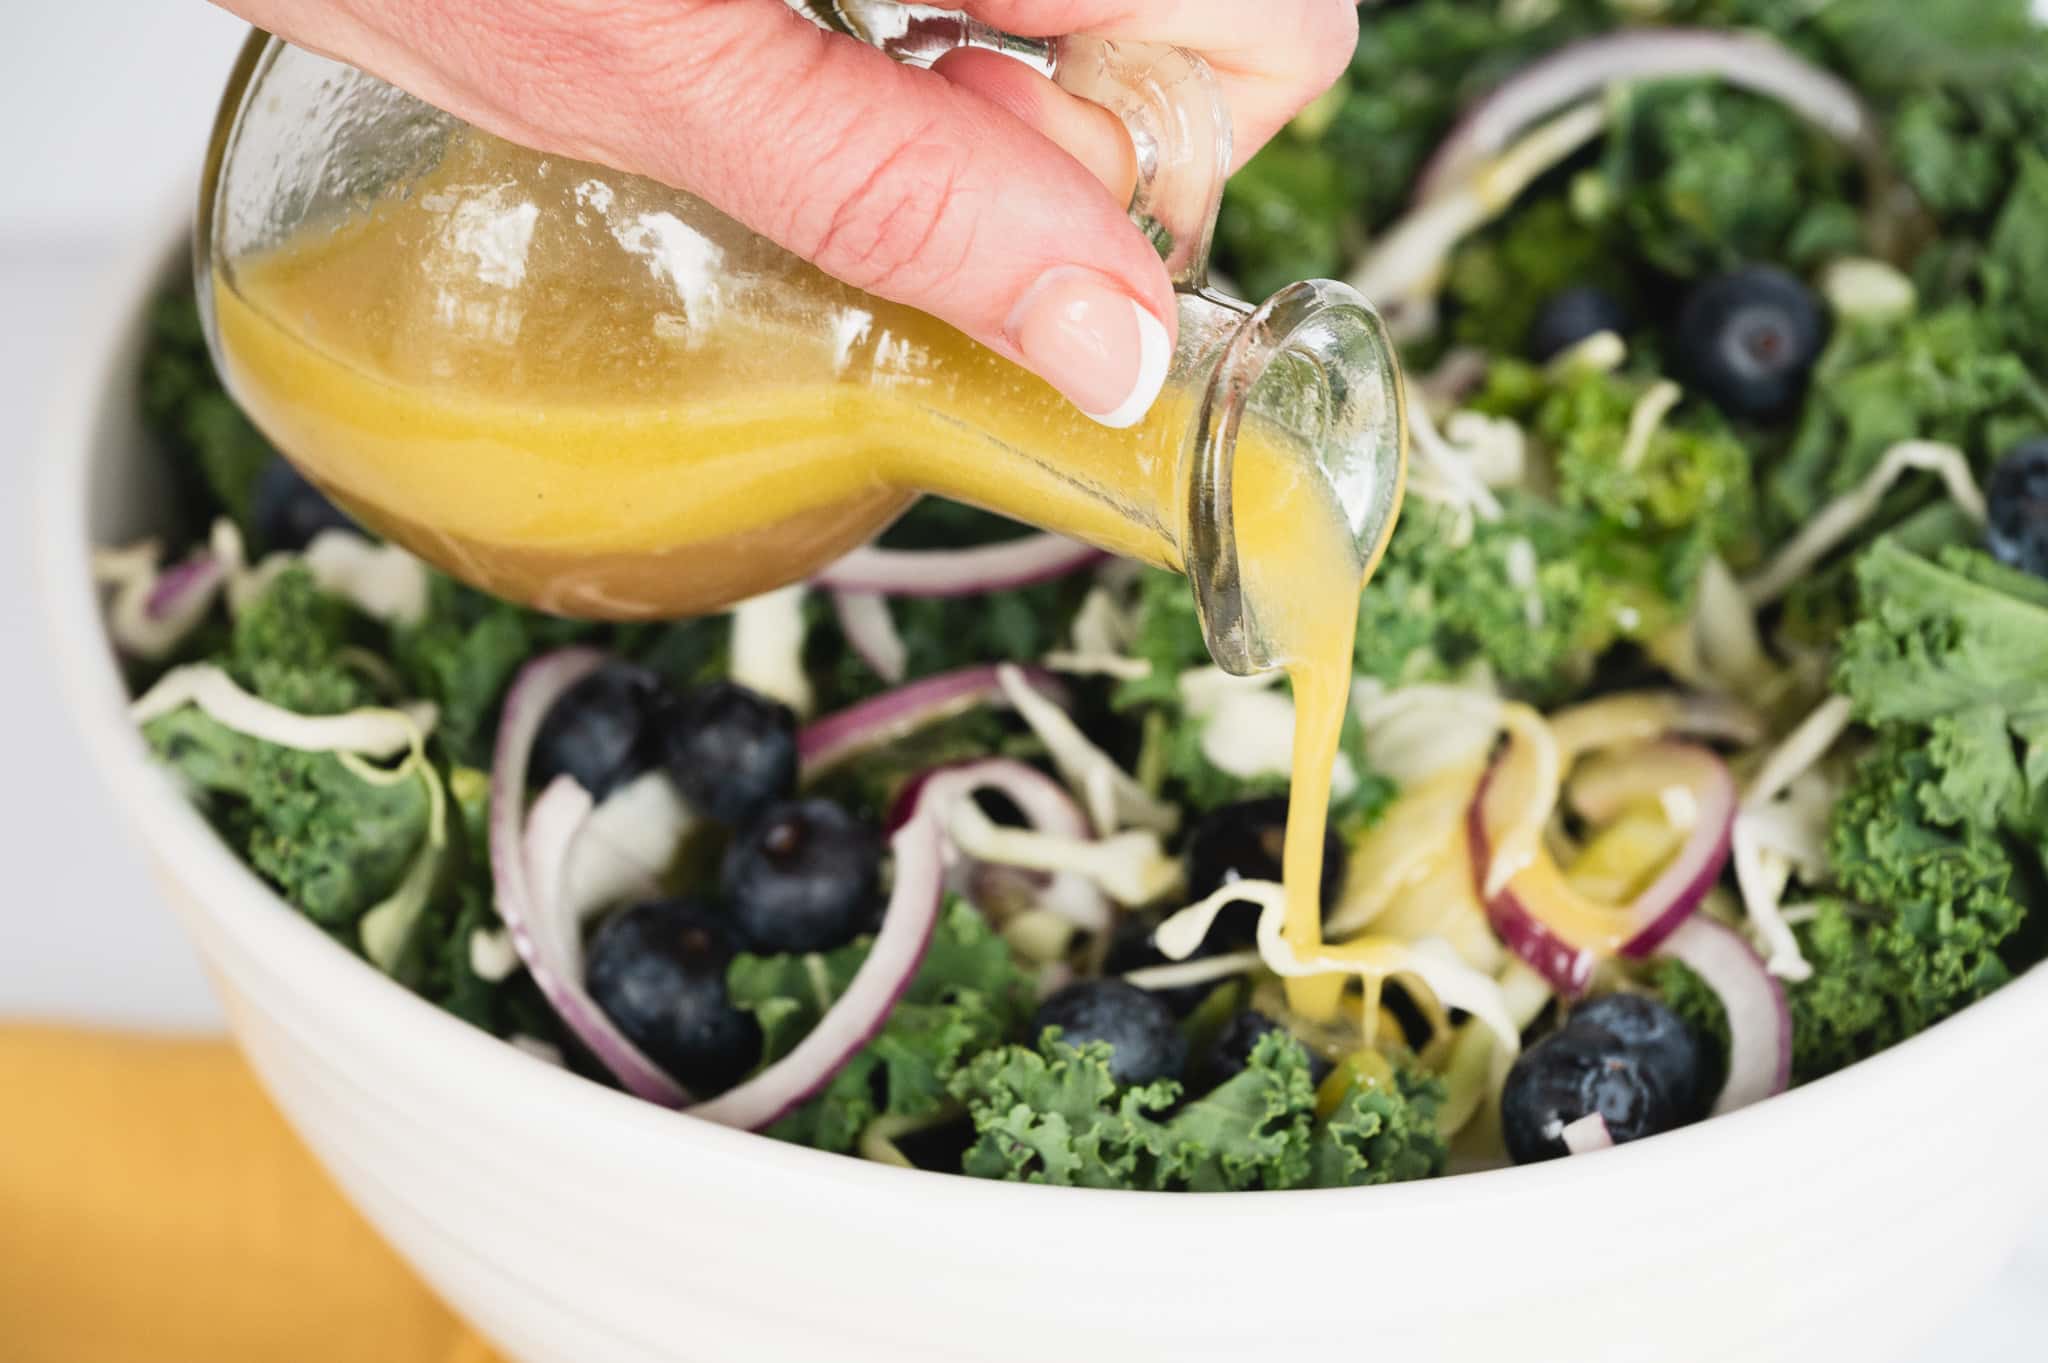 A close-up image of the completed Kale Crunch Salad in a white bowl, featuring a mixture of kale, cabbage, blueberries, red onions, and toasted nuts, with a stream of Apple Cider and Dijon Mustard vinaigrette being poured over the top, highlighting the final step in preparing this delicious and healthy salad.